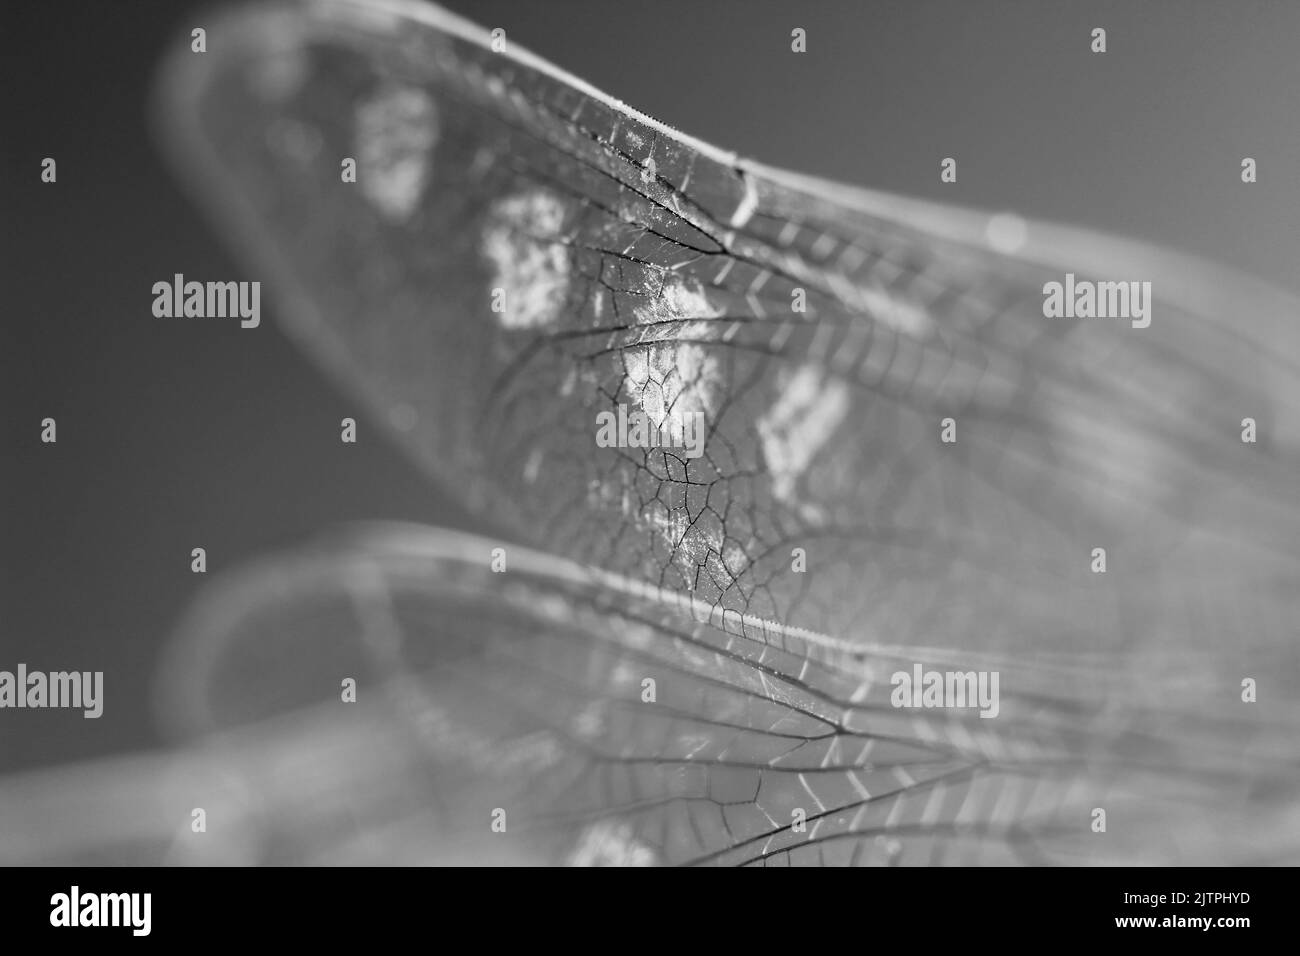 Beautiful Macro photography of Dragonfly wings on black background Stock Photo